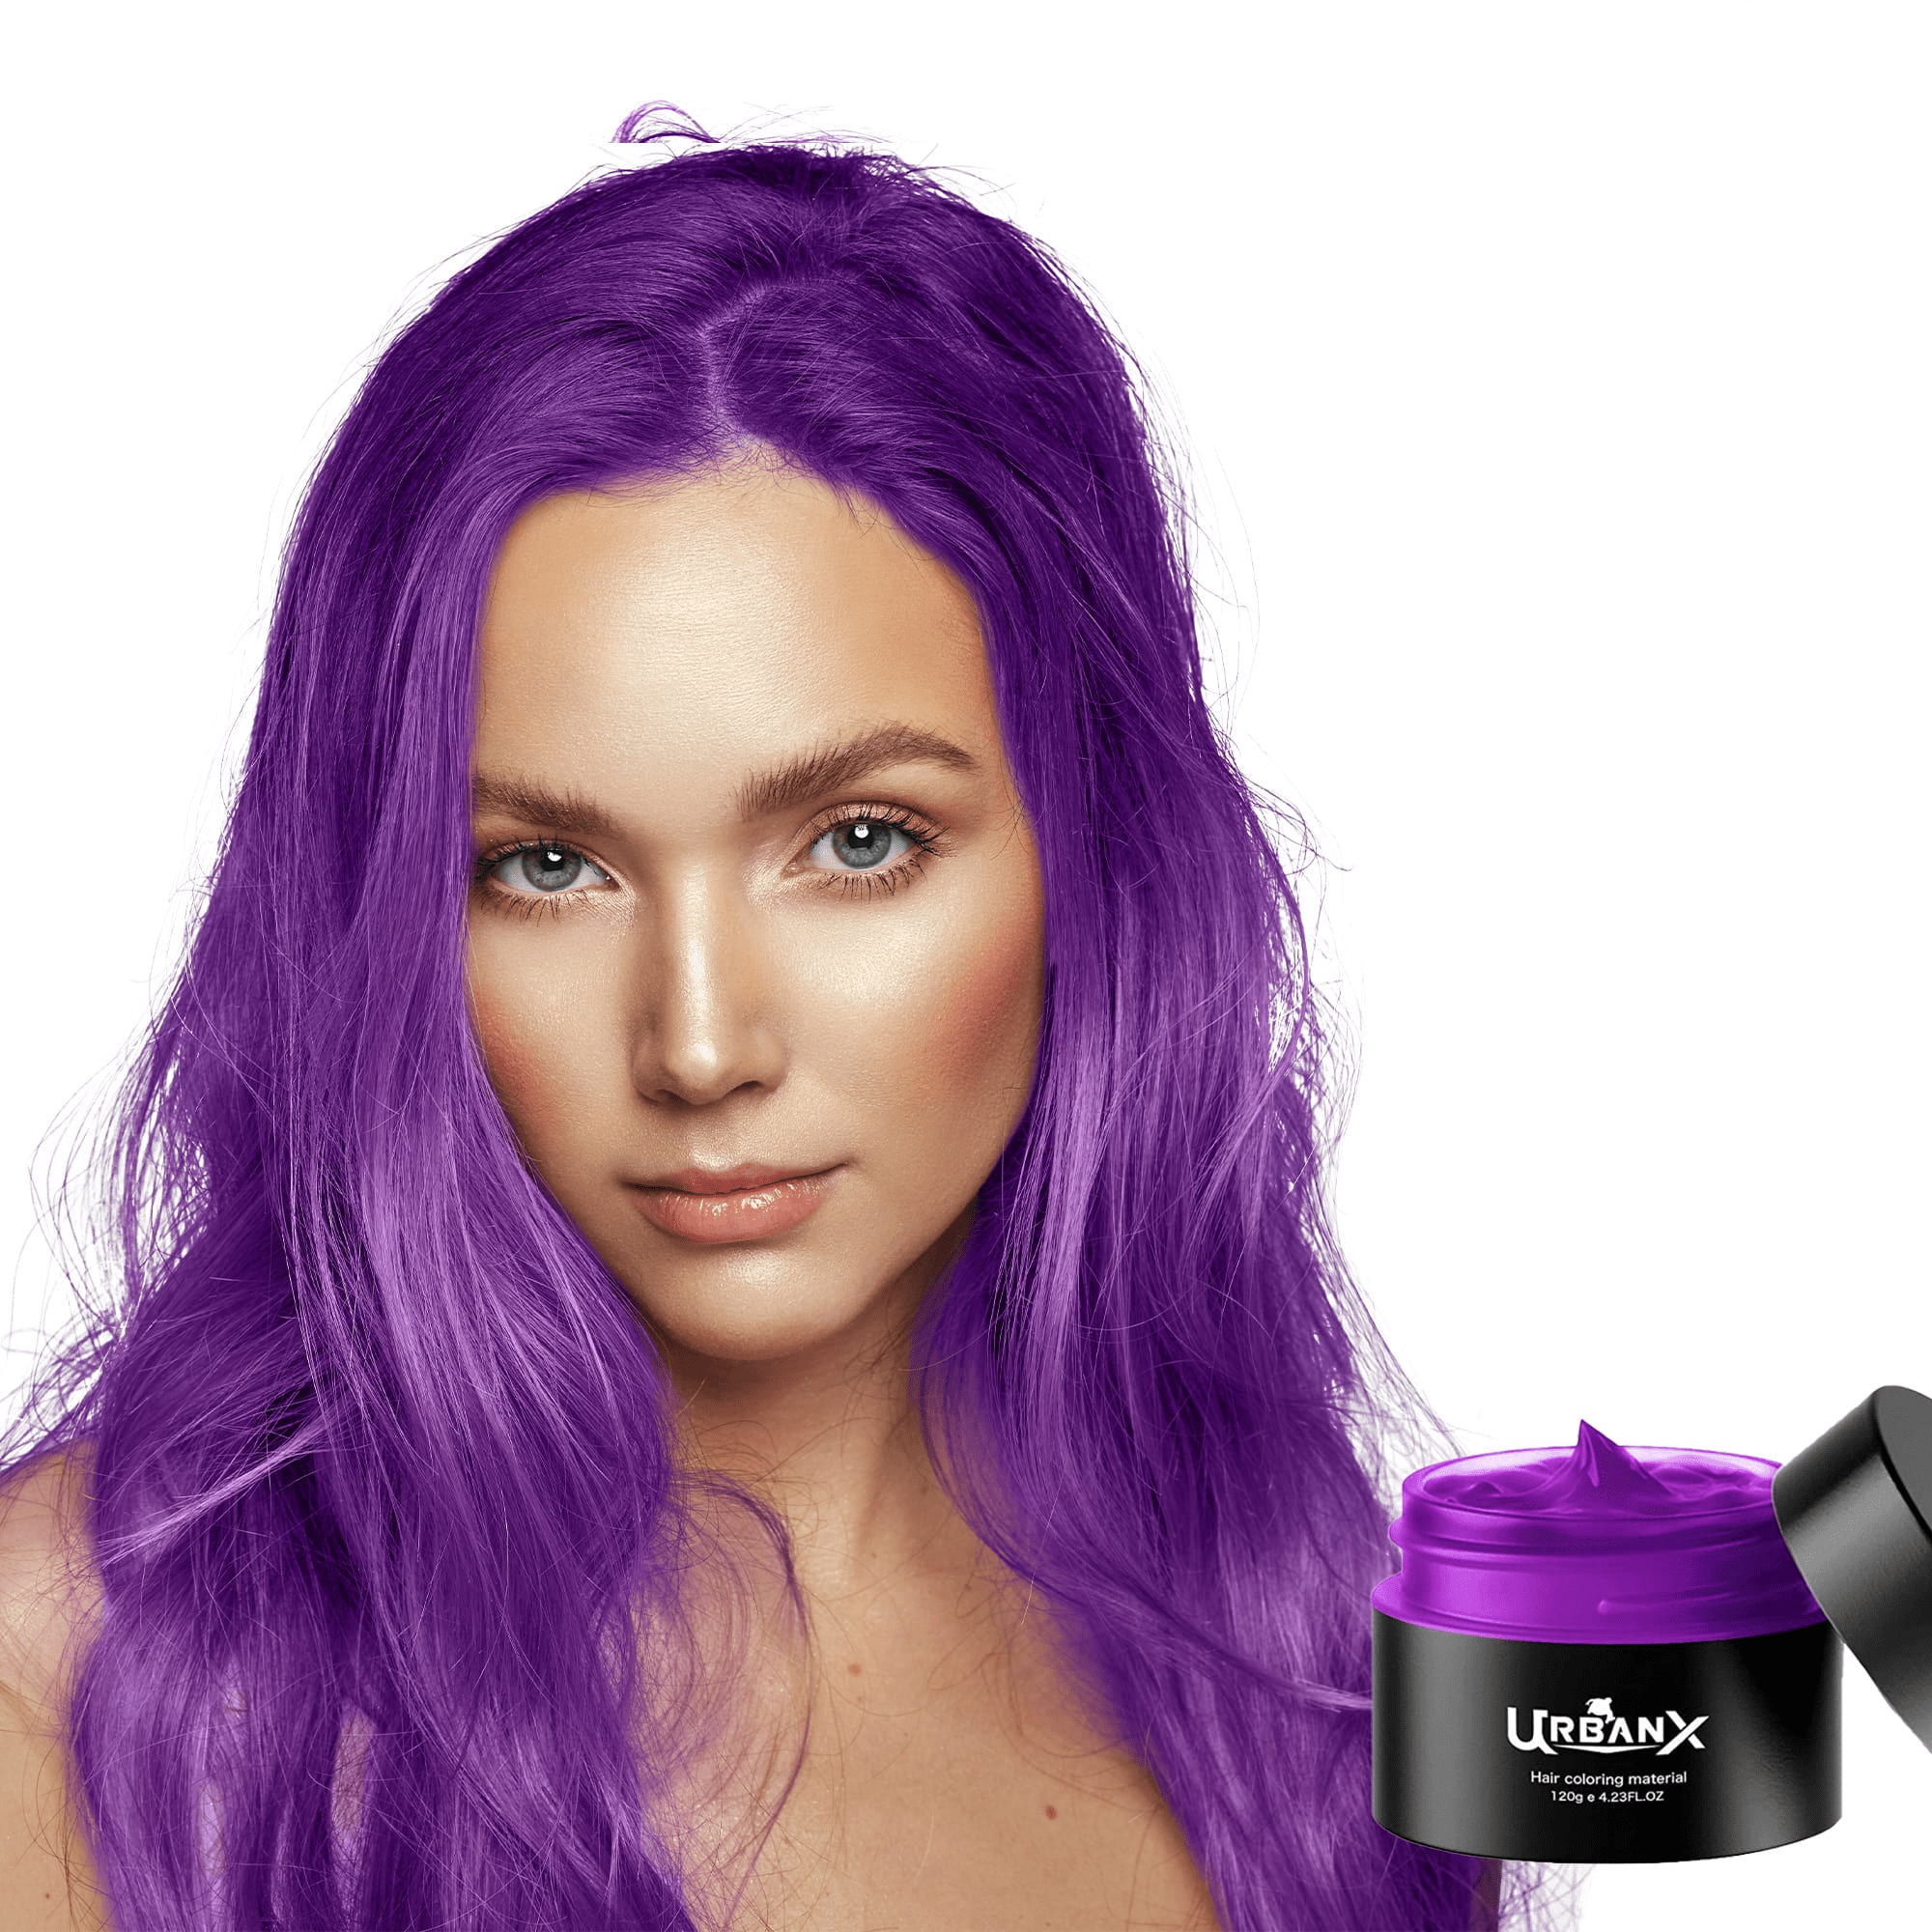 UrbanX Washable Hair Coloring Wax Material Unisex Color Dye Styling Cream  Natural Hairstyle for Blonde Color Hair Pomade Temporary Party Cosplay  Natural Ingredients - Purple 